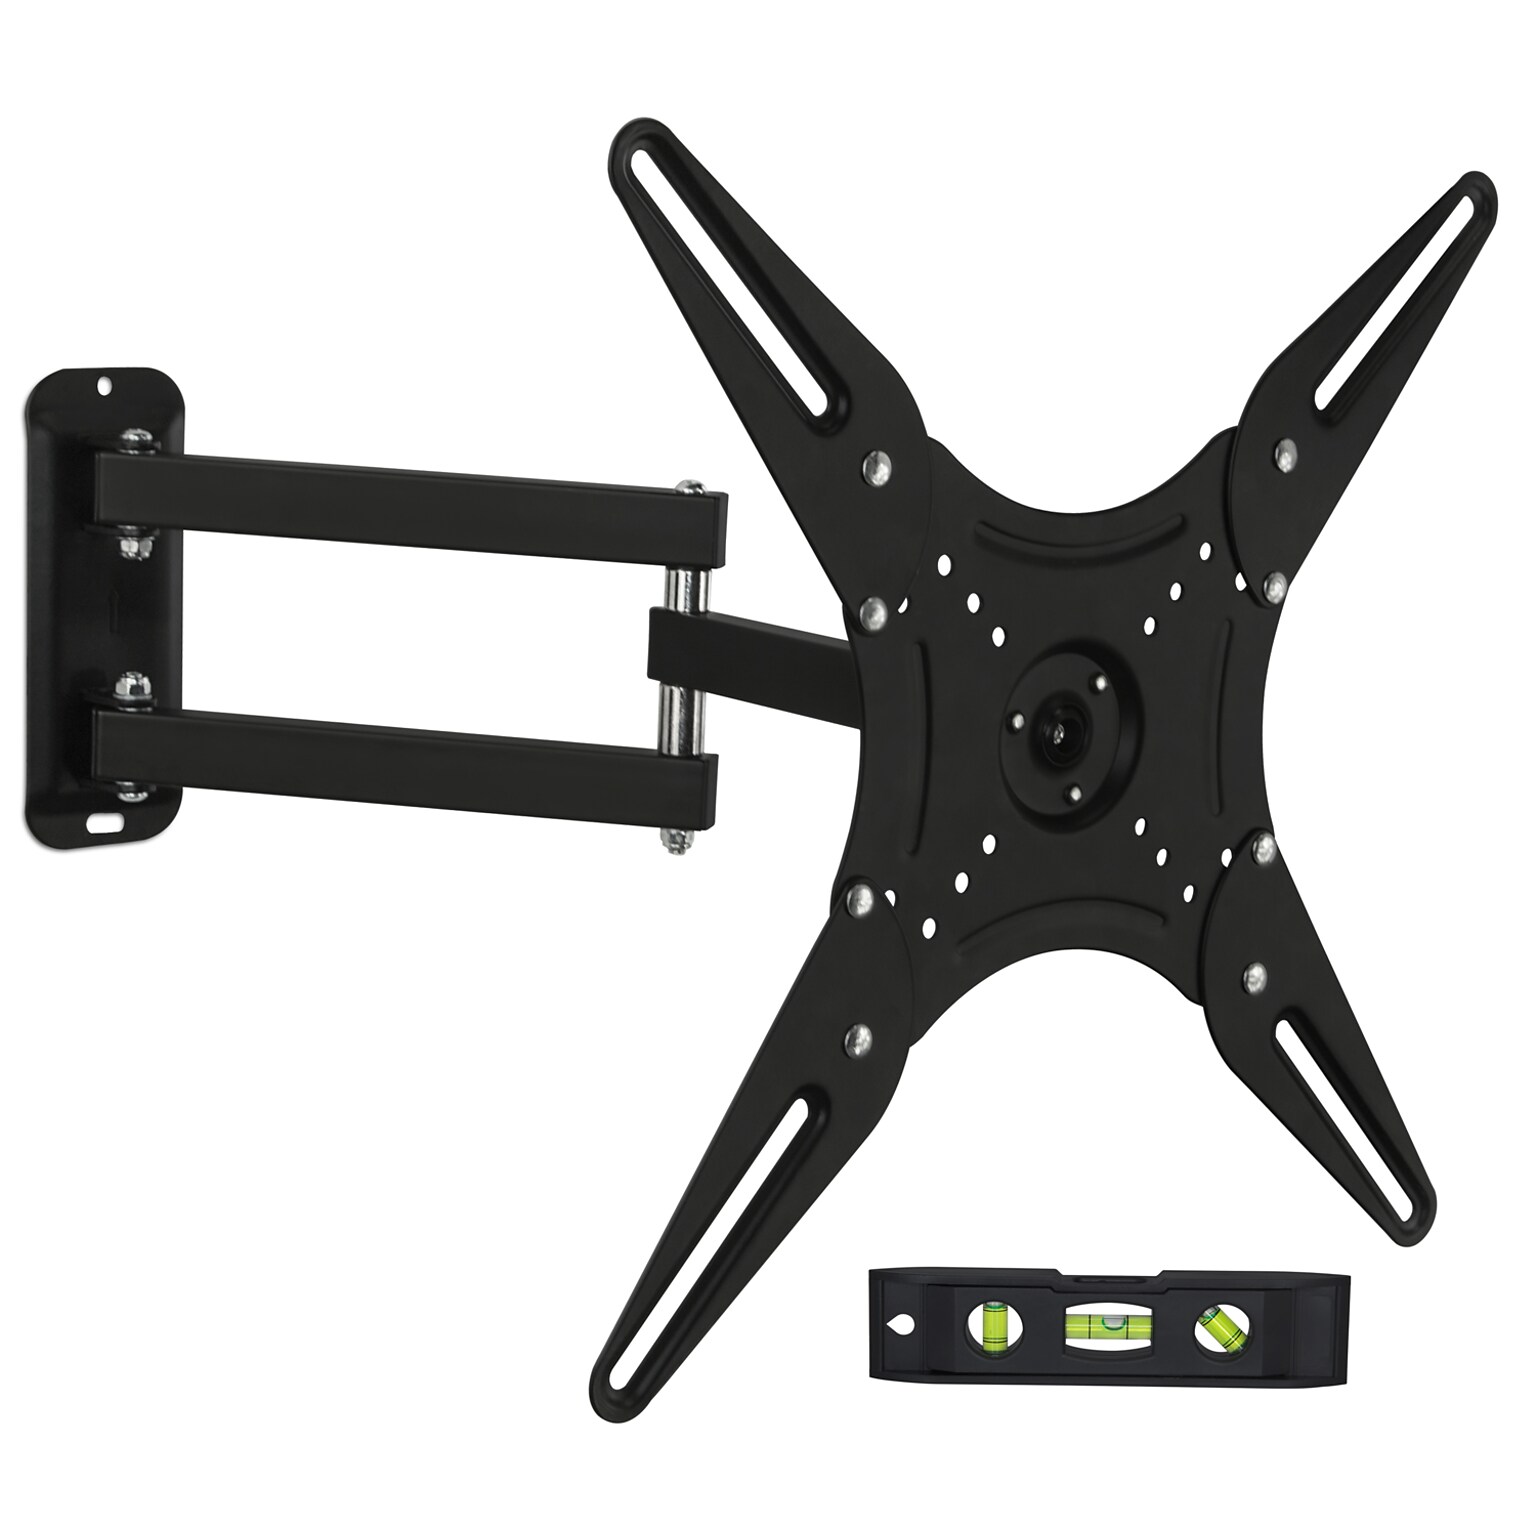 Mount-It! Full-Motion TV Wall Mount for 23 to 55 Flat Screens (MI-2065L)